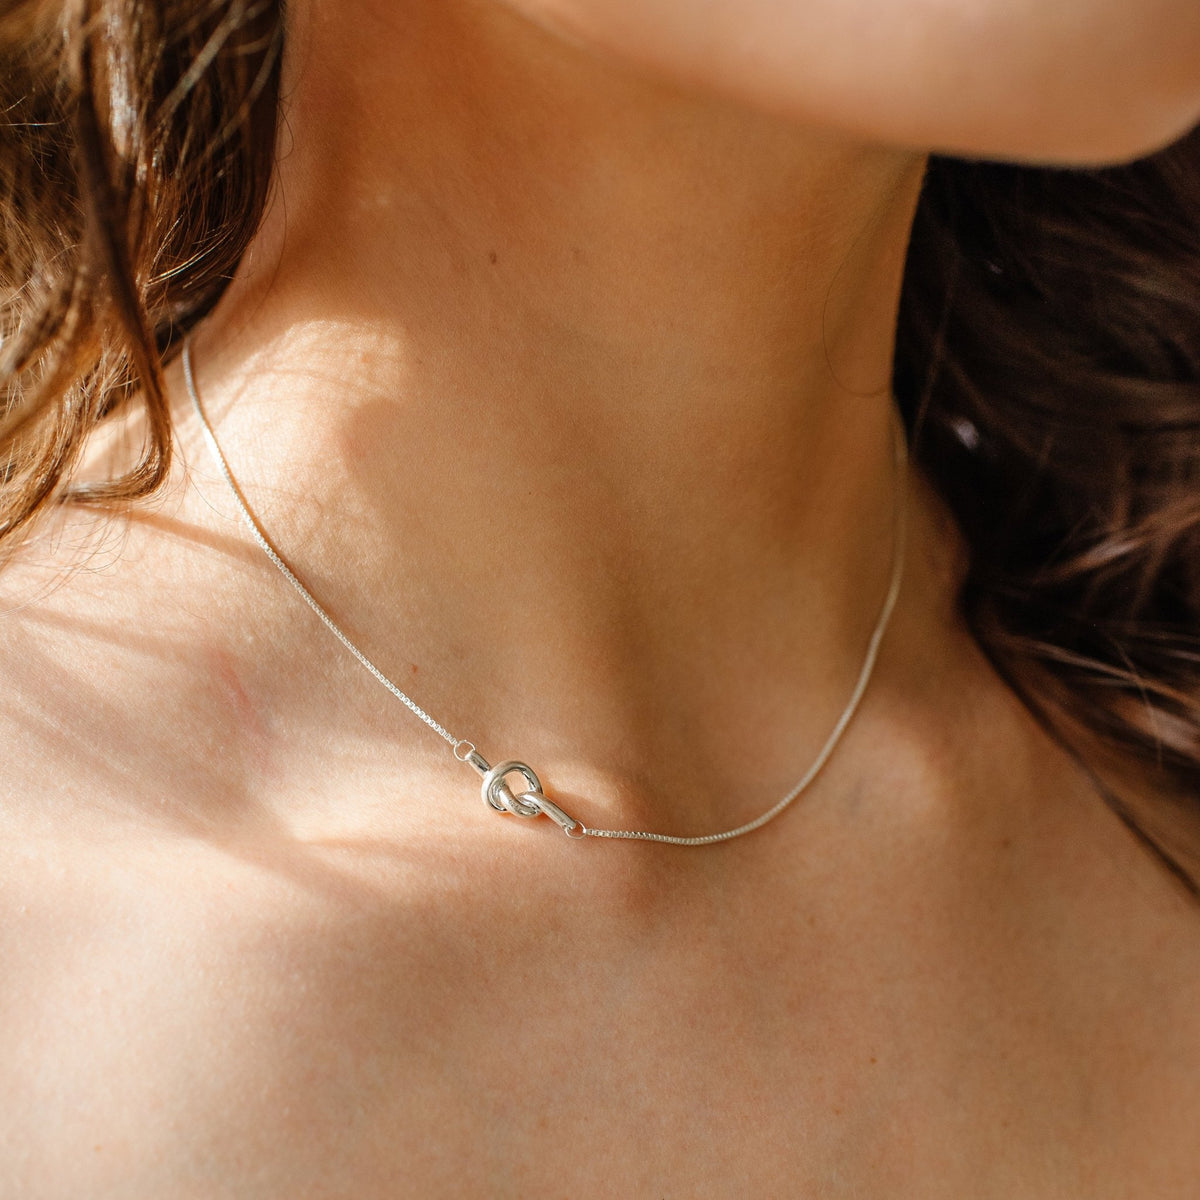 POISE OFFSET KNOT NECKLACE - SILVER - SO PRETTY CARA COTTER